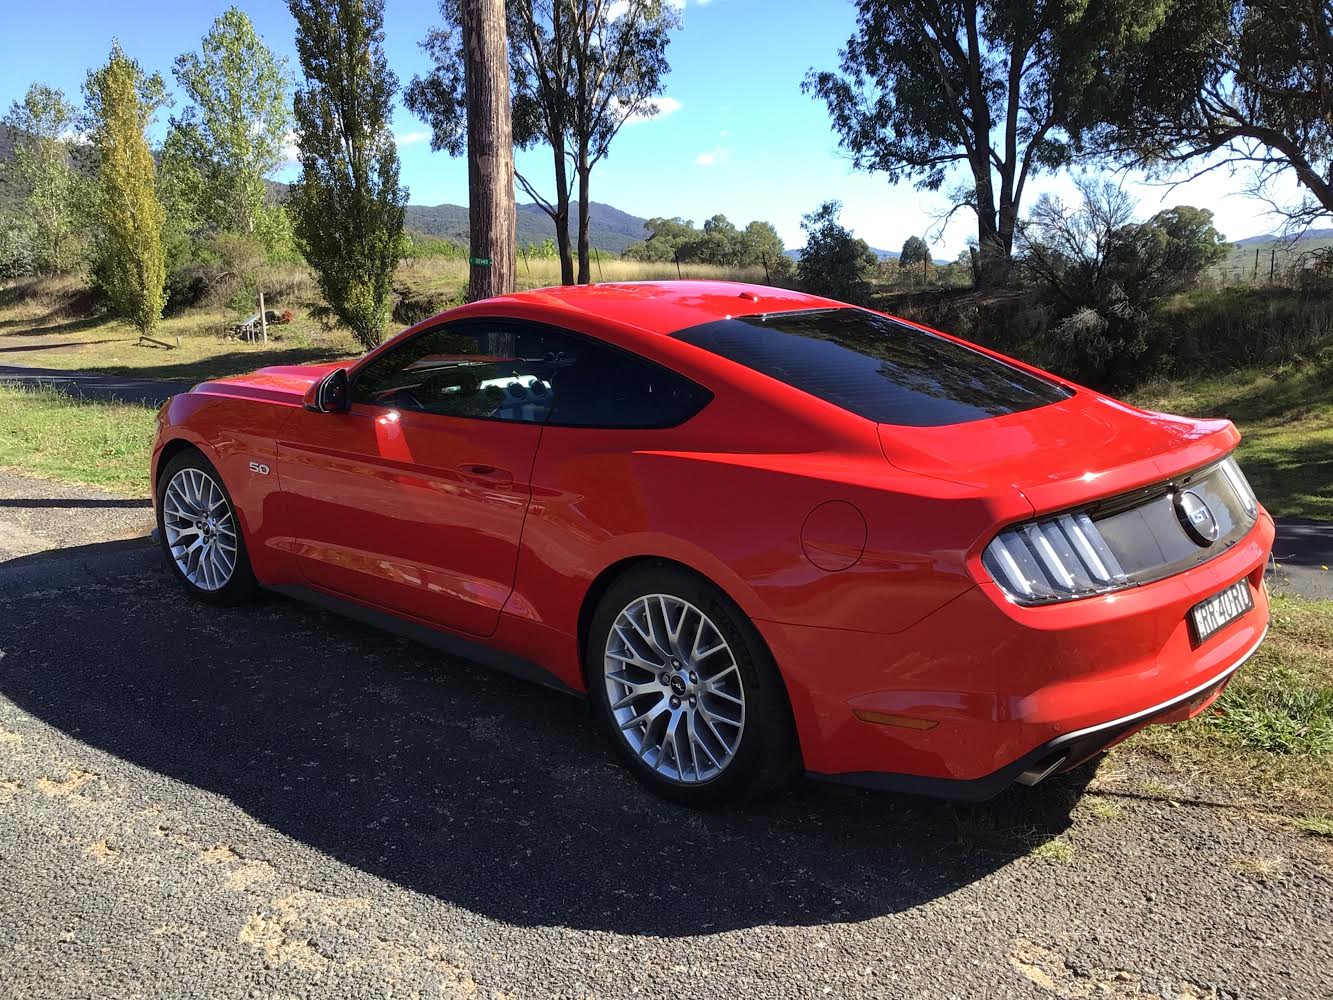 S650 Mustang Post Pictures of Your Car 0F43672F-B02A-4052-AA9F-5DB078251EAF